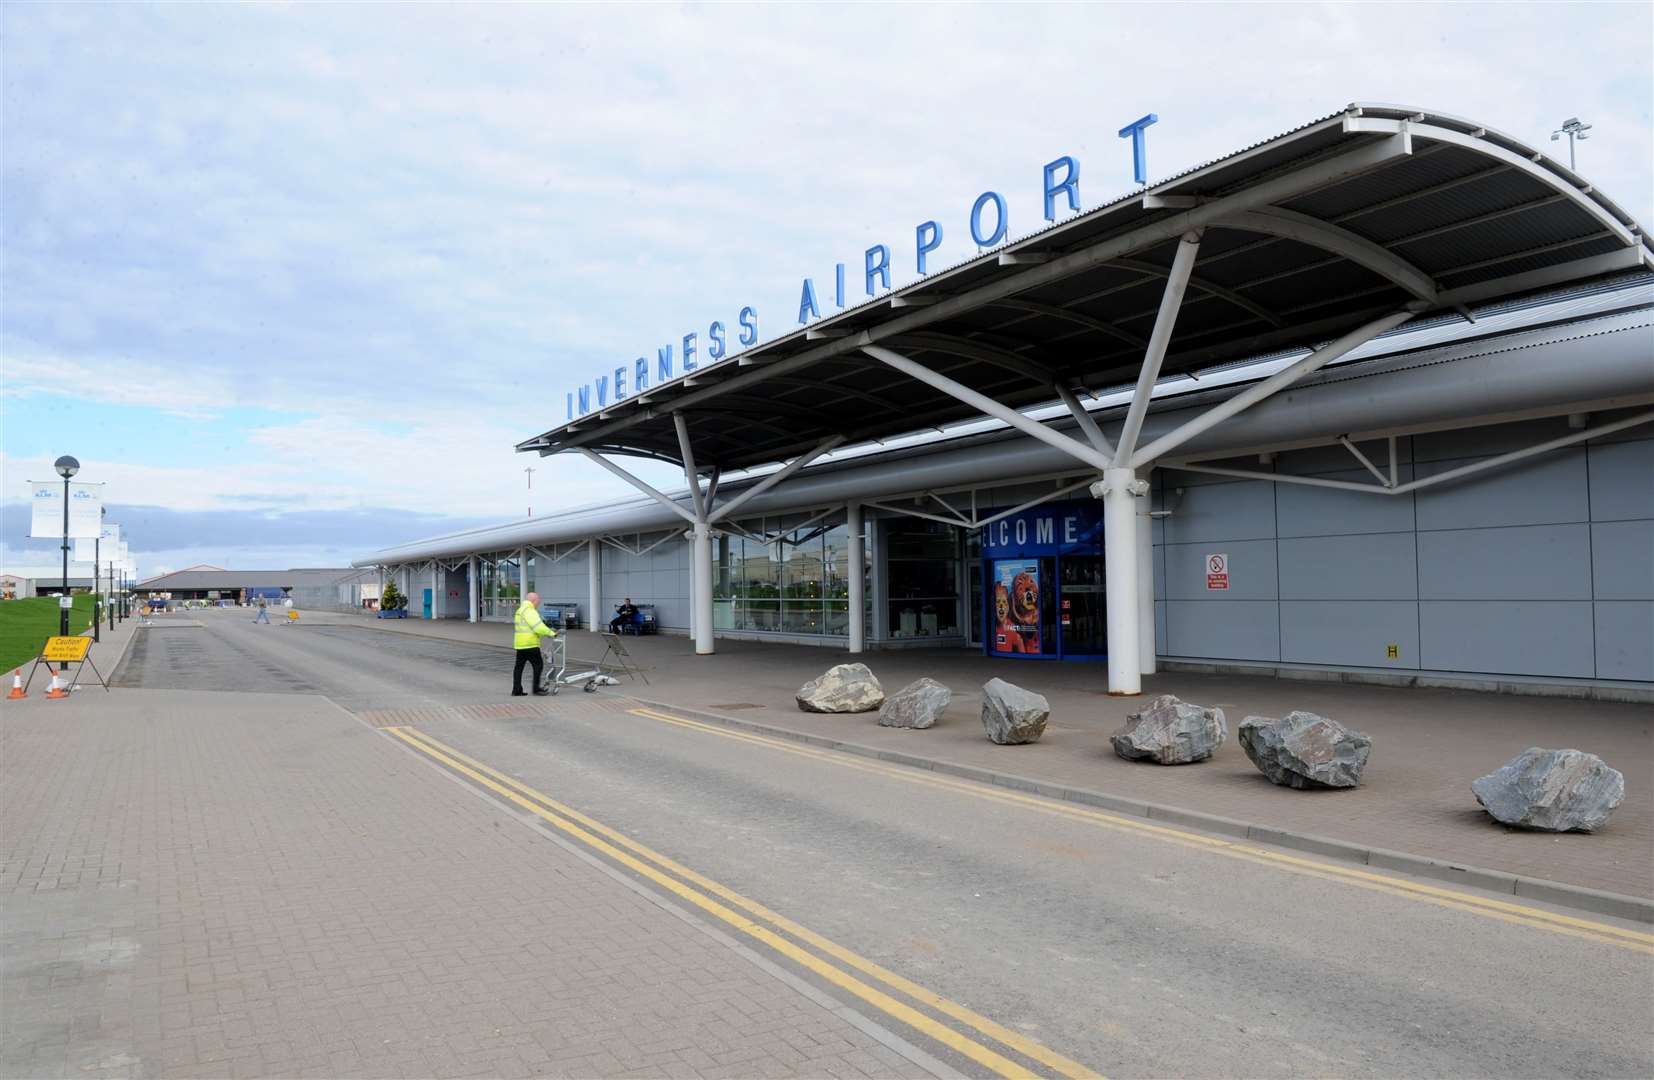 Inverness Airport will host a centralised surveillance operation for HIAL's Sumburgh, Kirkwall, Stornoway and Dundee airports, as well as Inverness.